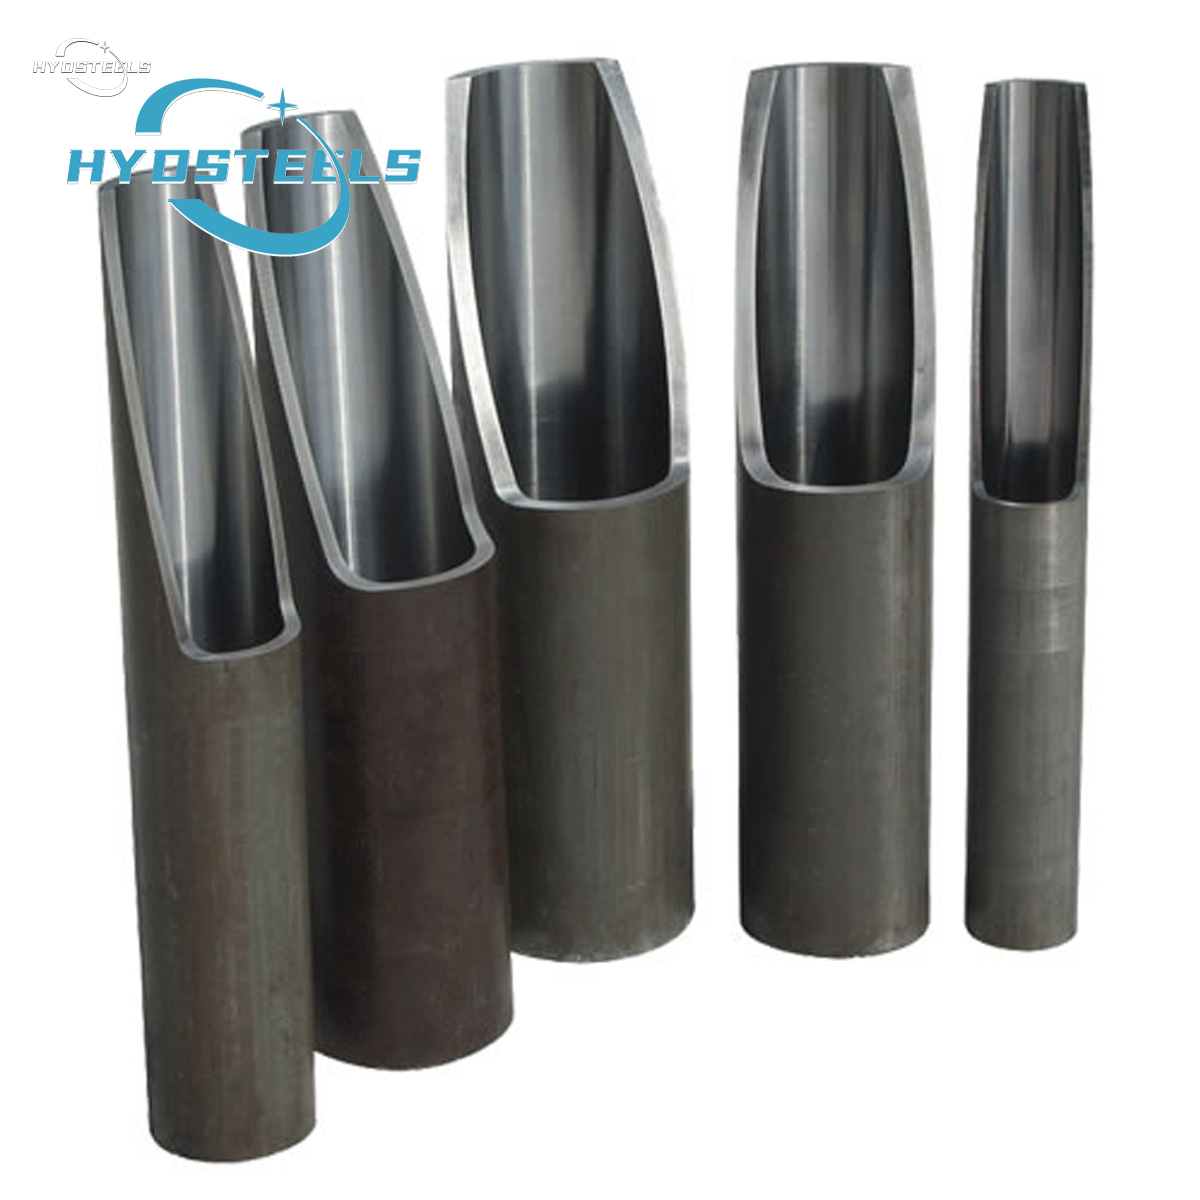 China ST52 Carbon Steel Cold Drawn Seamless Prehoned Pipes Supplier